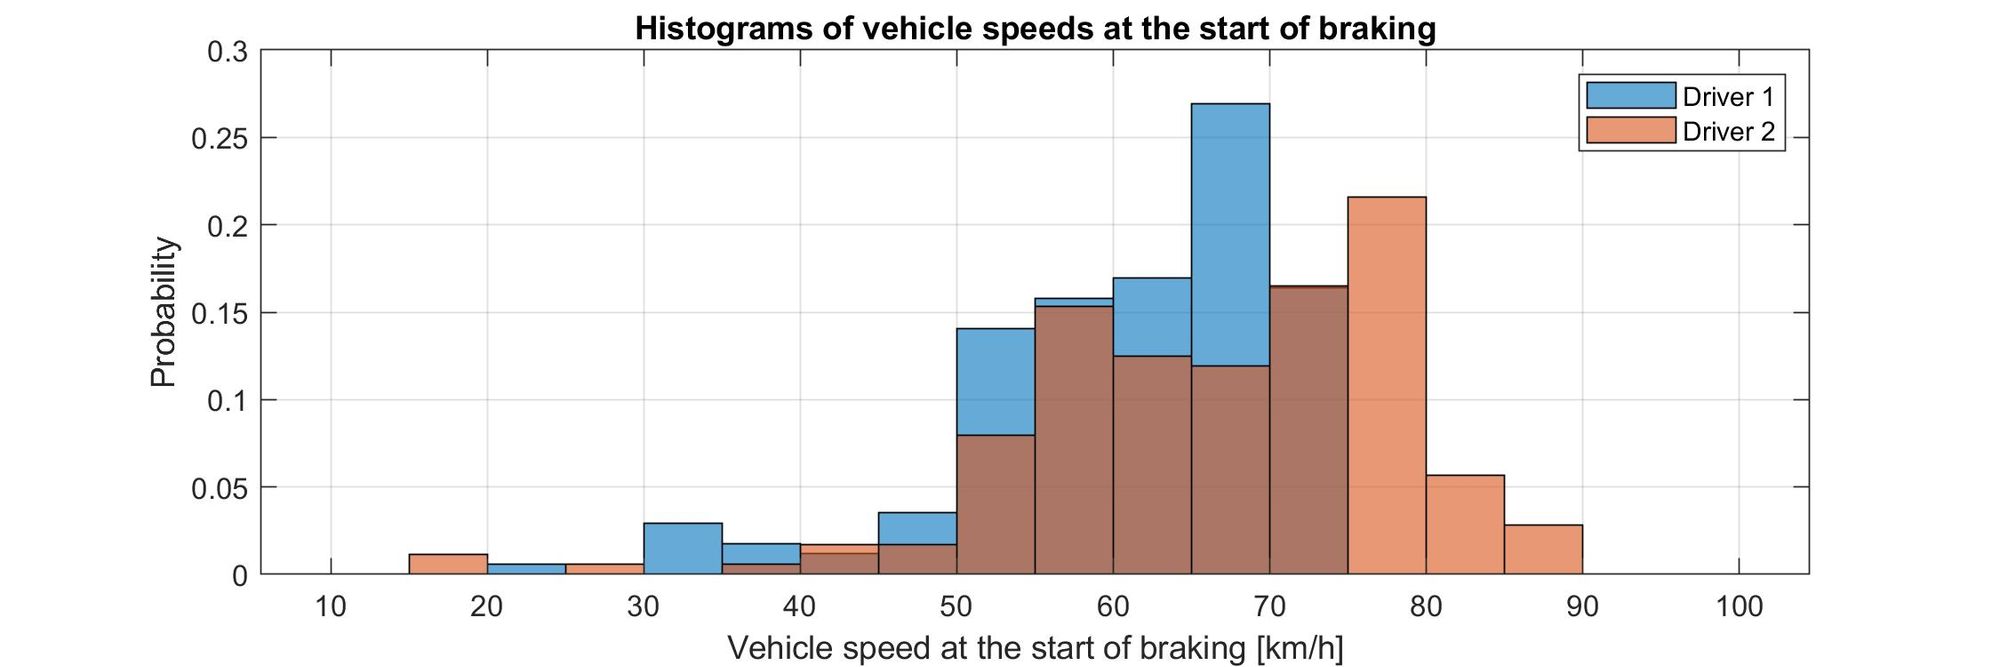 Two overlapping histograms comparinng the distribution of vehicle speeds at the start of braking for two drivers. Horizontal axis shows speed and vertical axis shows Probability